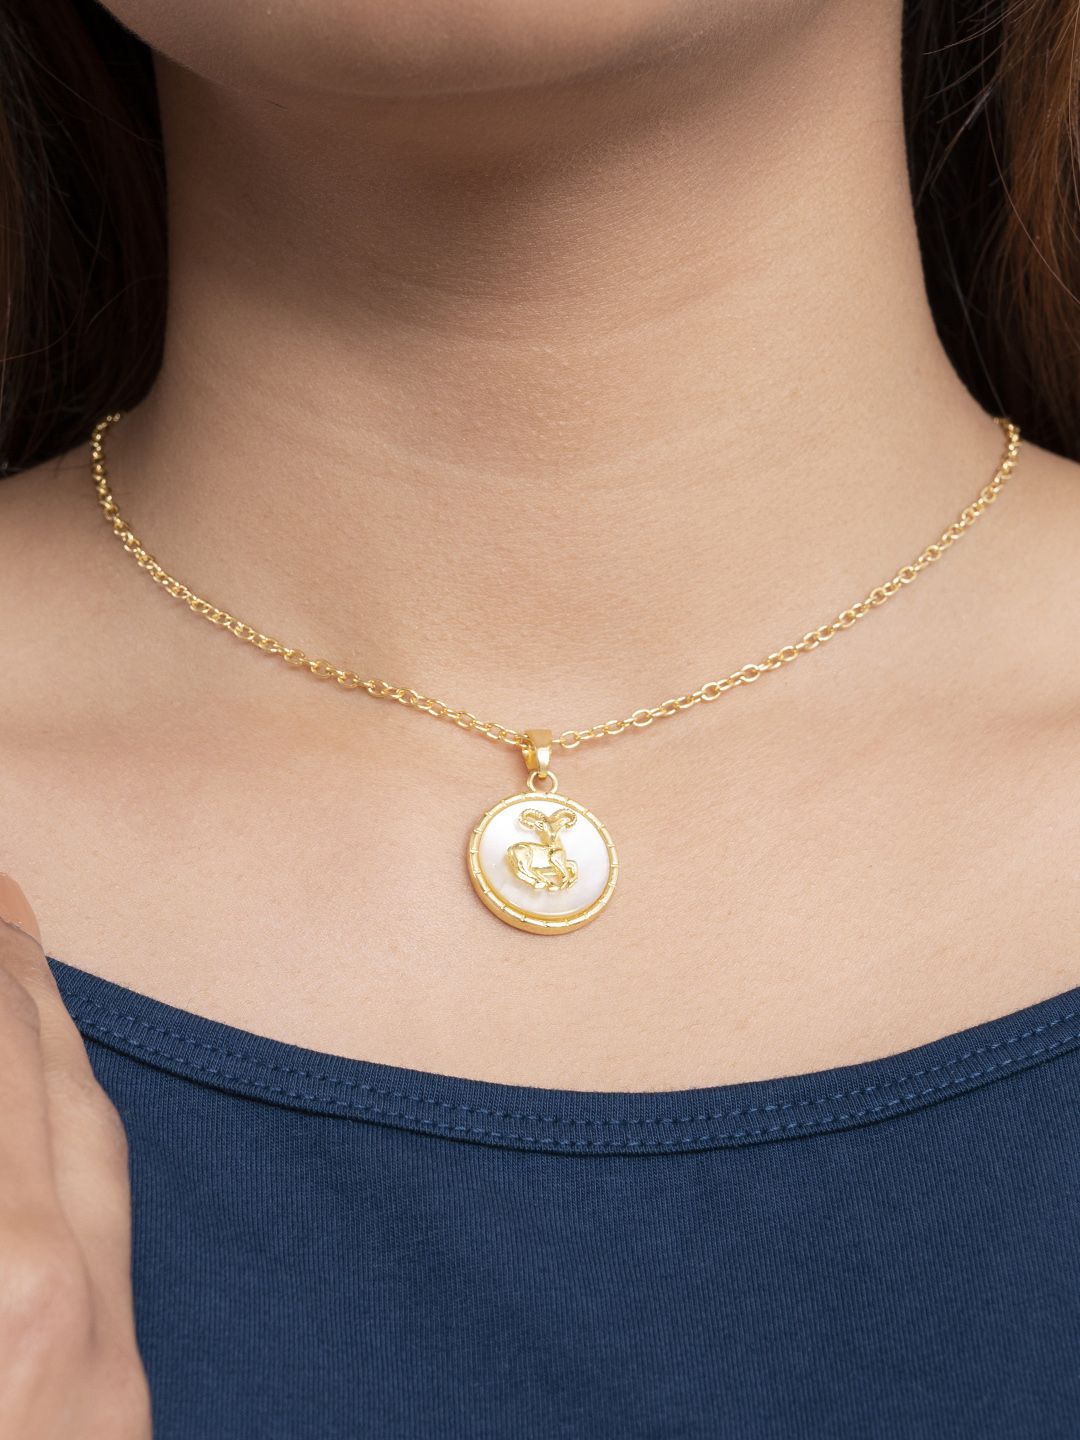 Mikoto by FableStreet 18K Gold-Plated & White Mother of Pearl Aries Zodiac Necklace Price in India